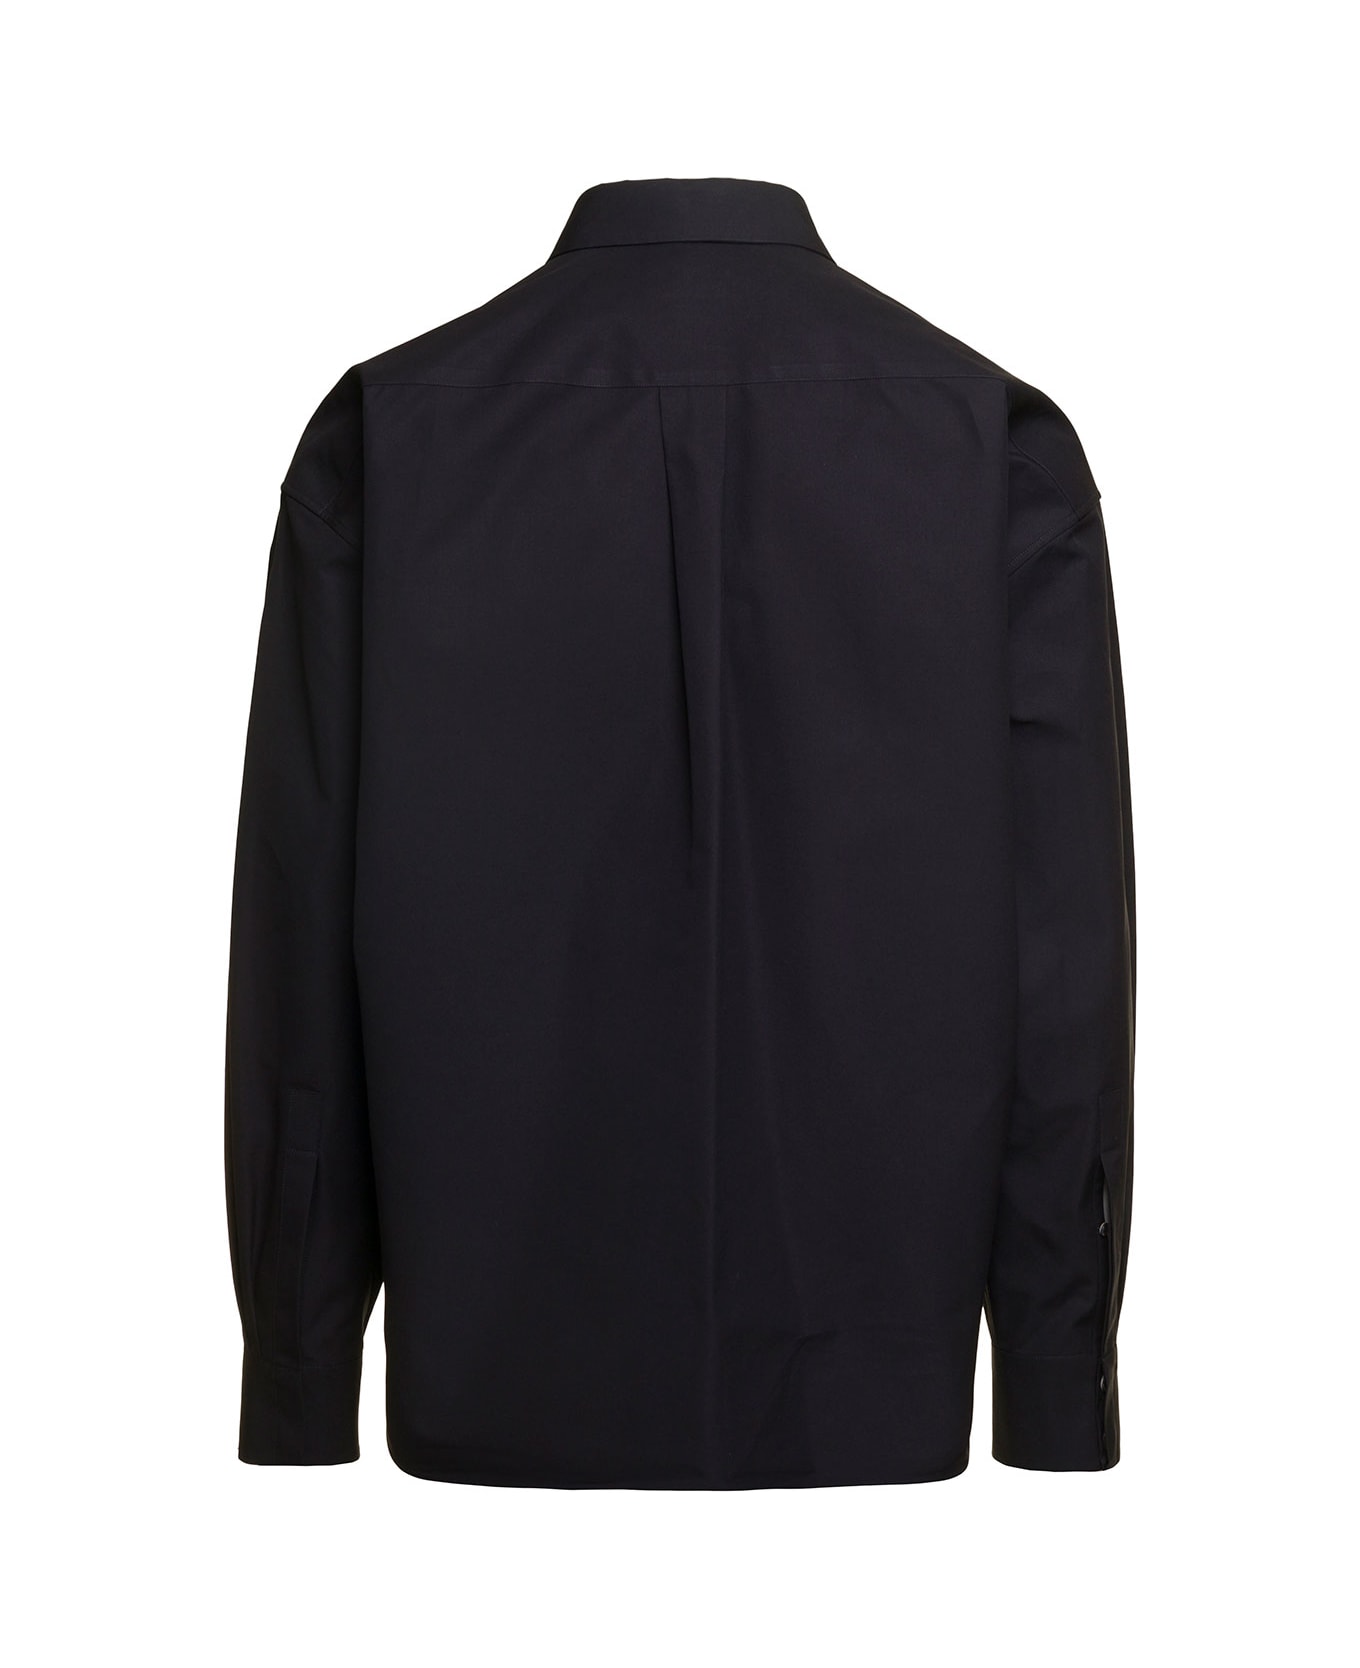 Alexander McQueen Oversized Shirt With Patch Pockets With Flaps - Black